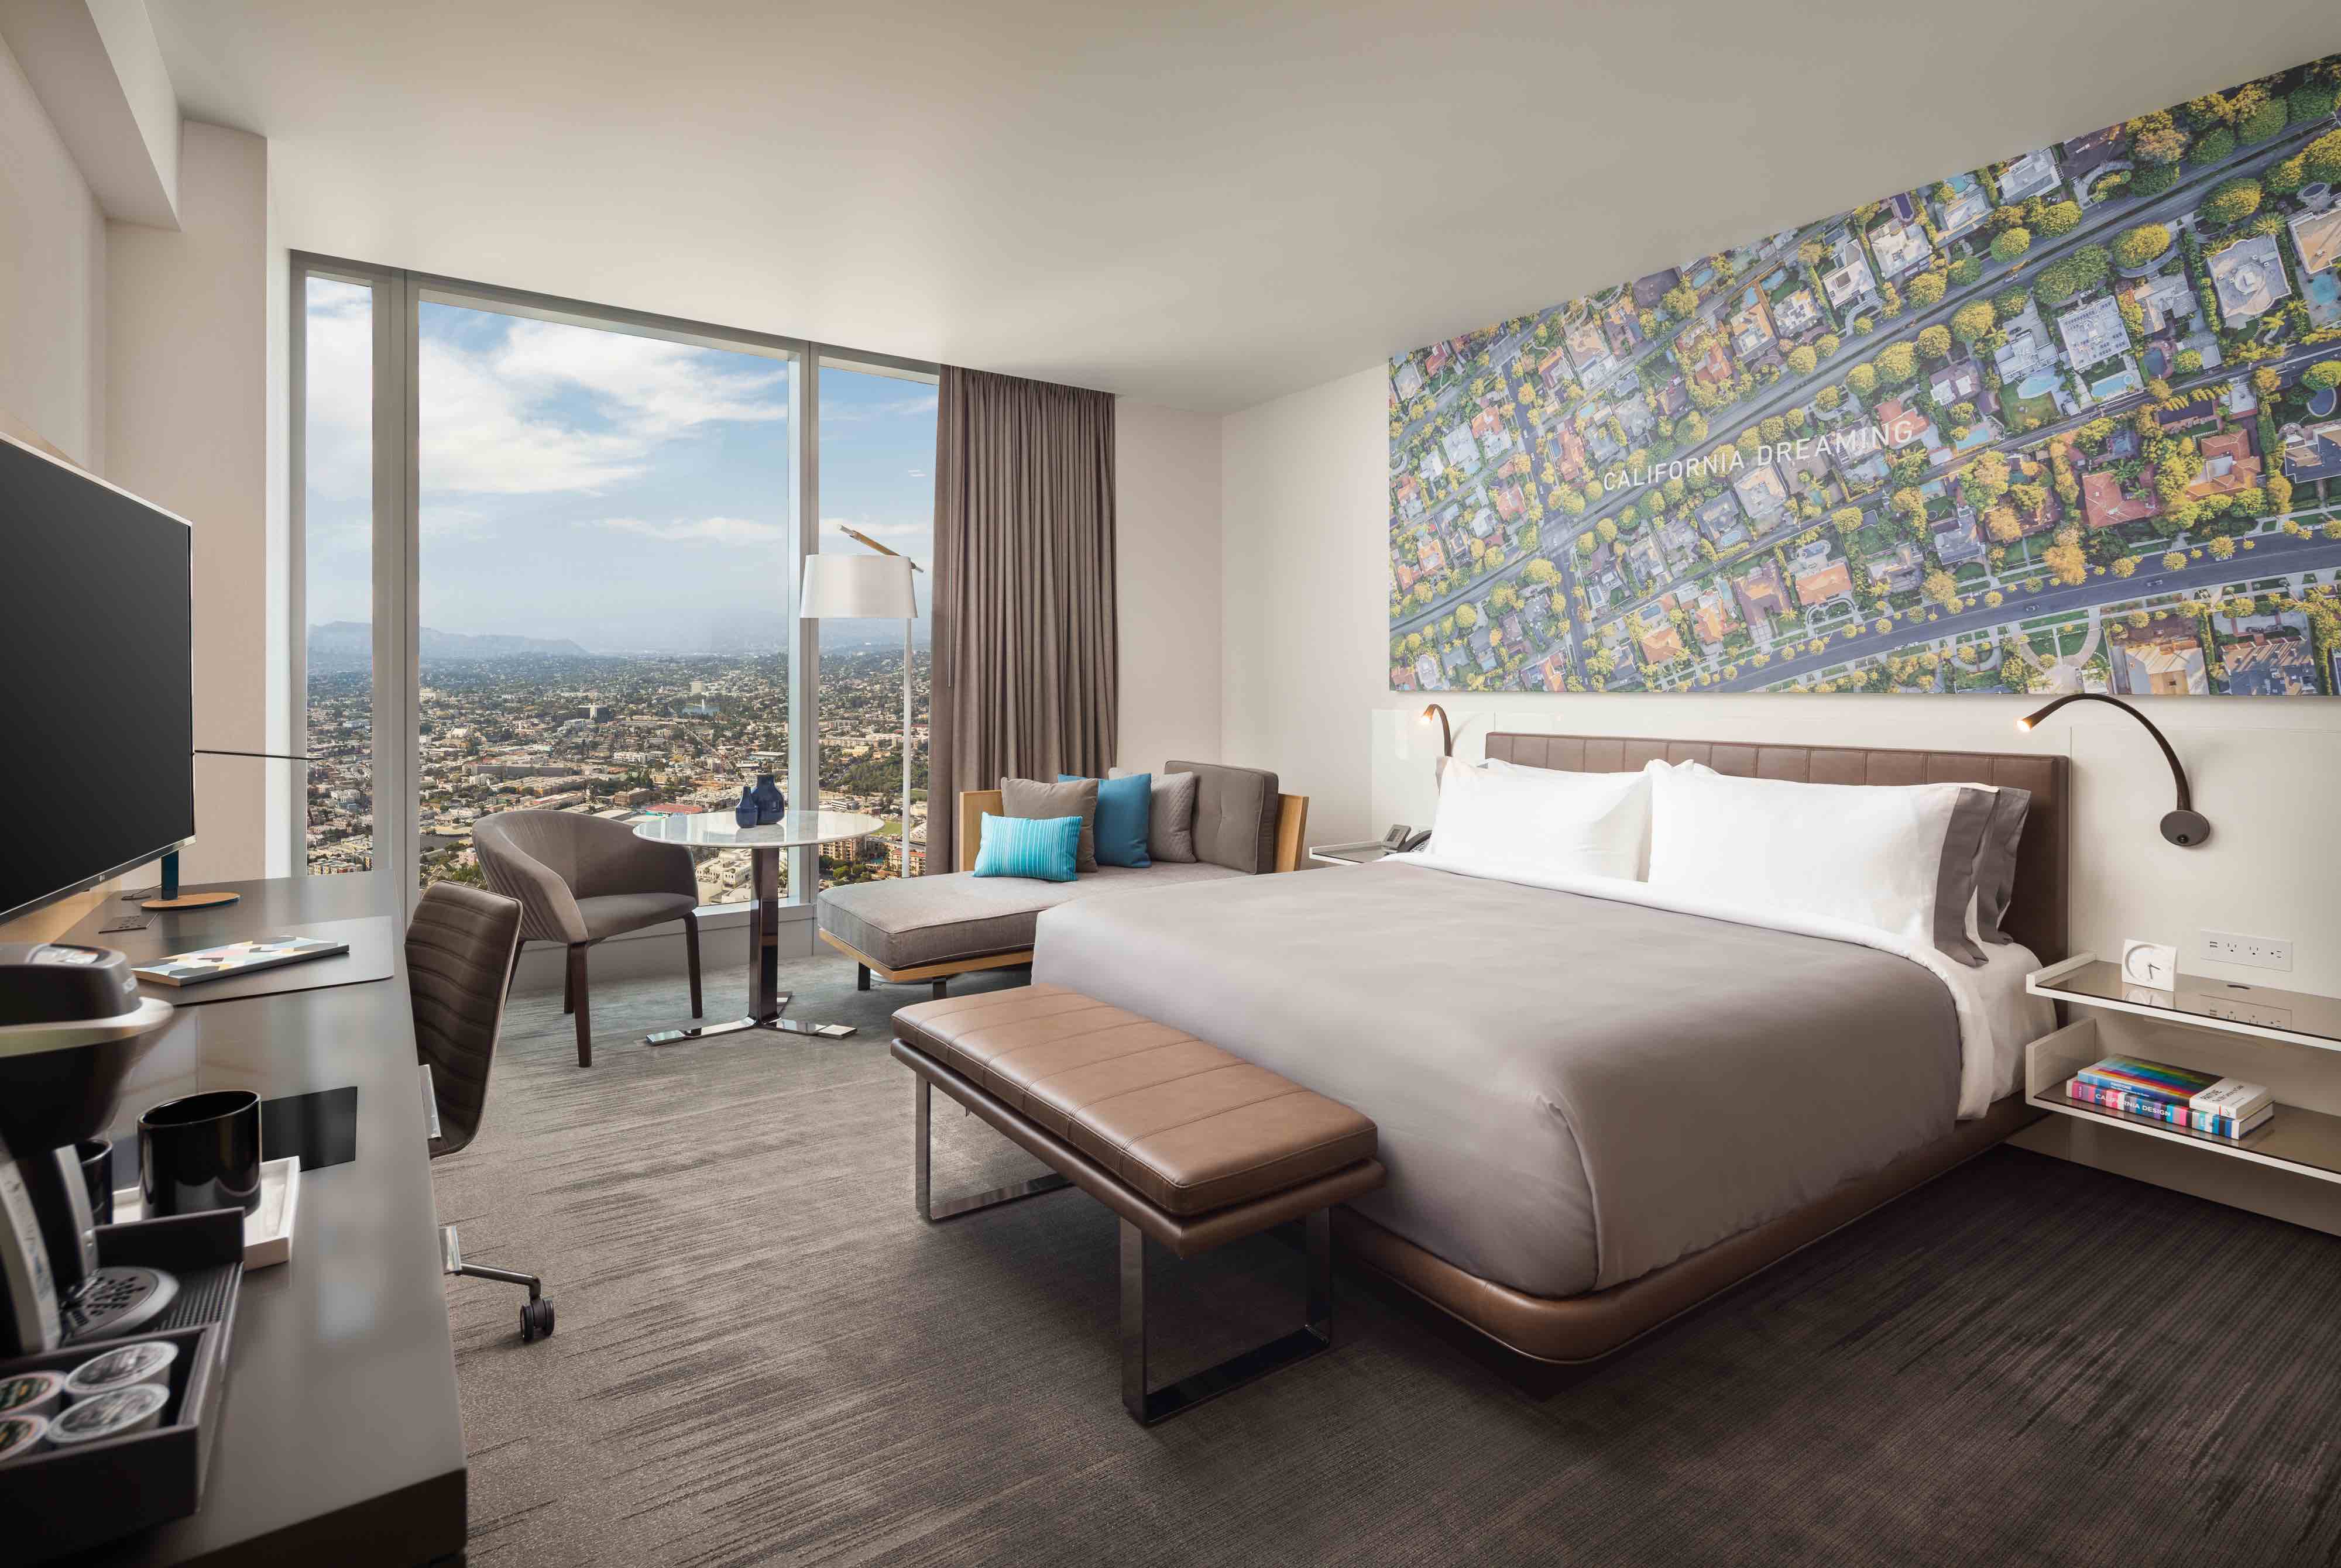 Hotels Los Angeles Hotels Deals At Best Buy